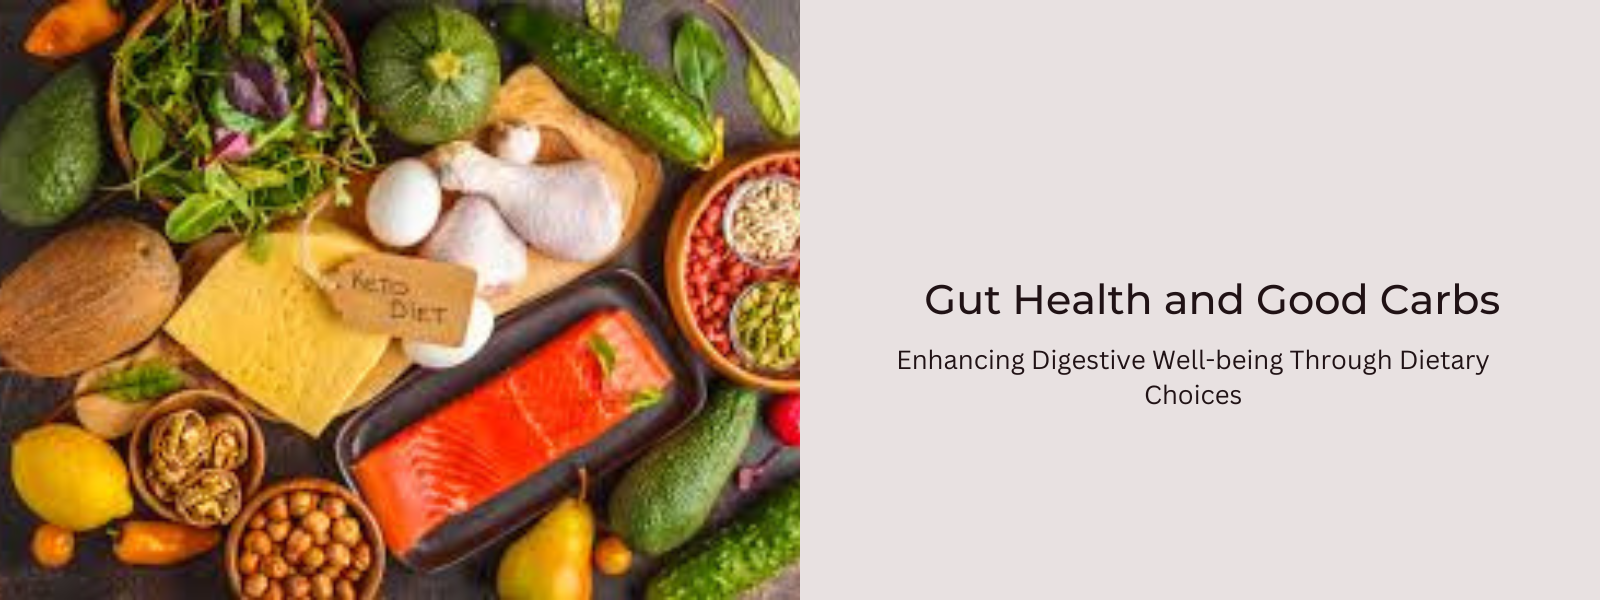 Gut Health and Good Carbs: Enhancing Digestive Well-being Through Dietary Choices